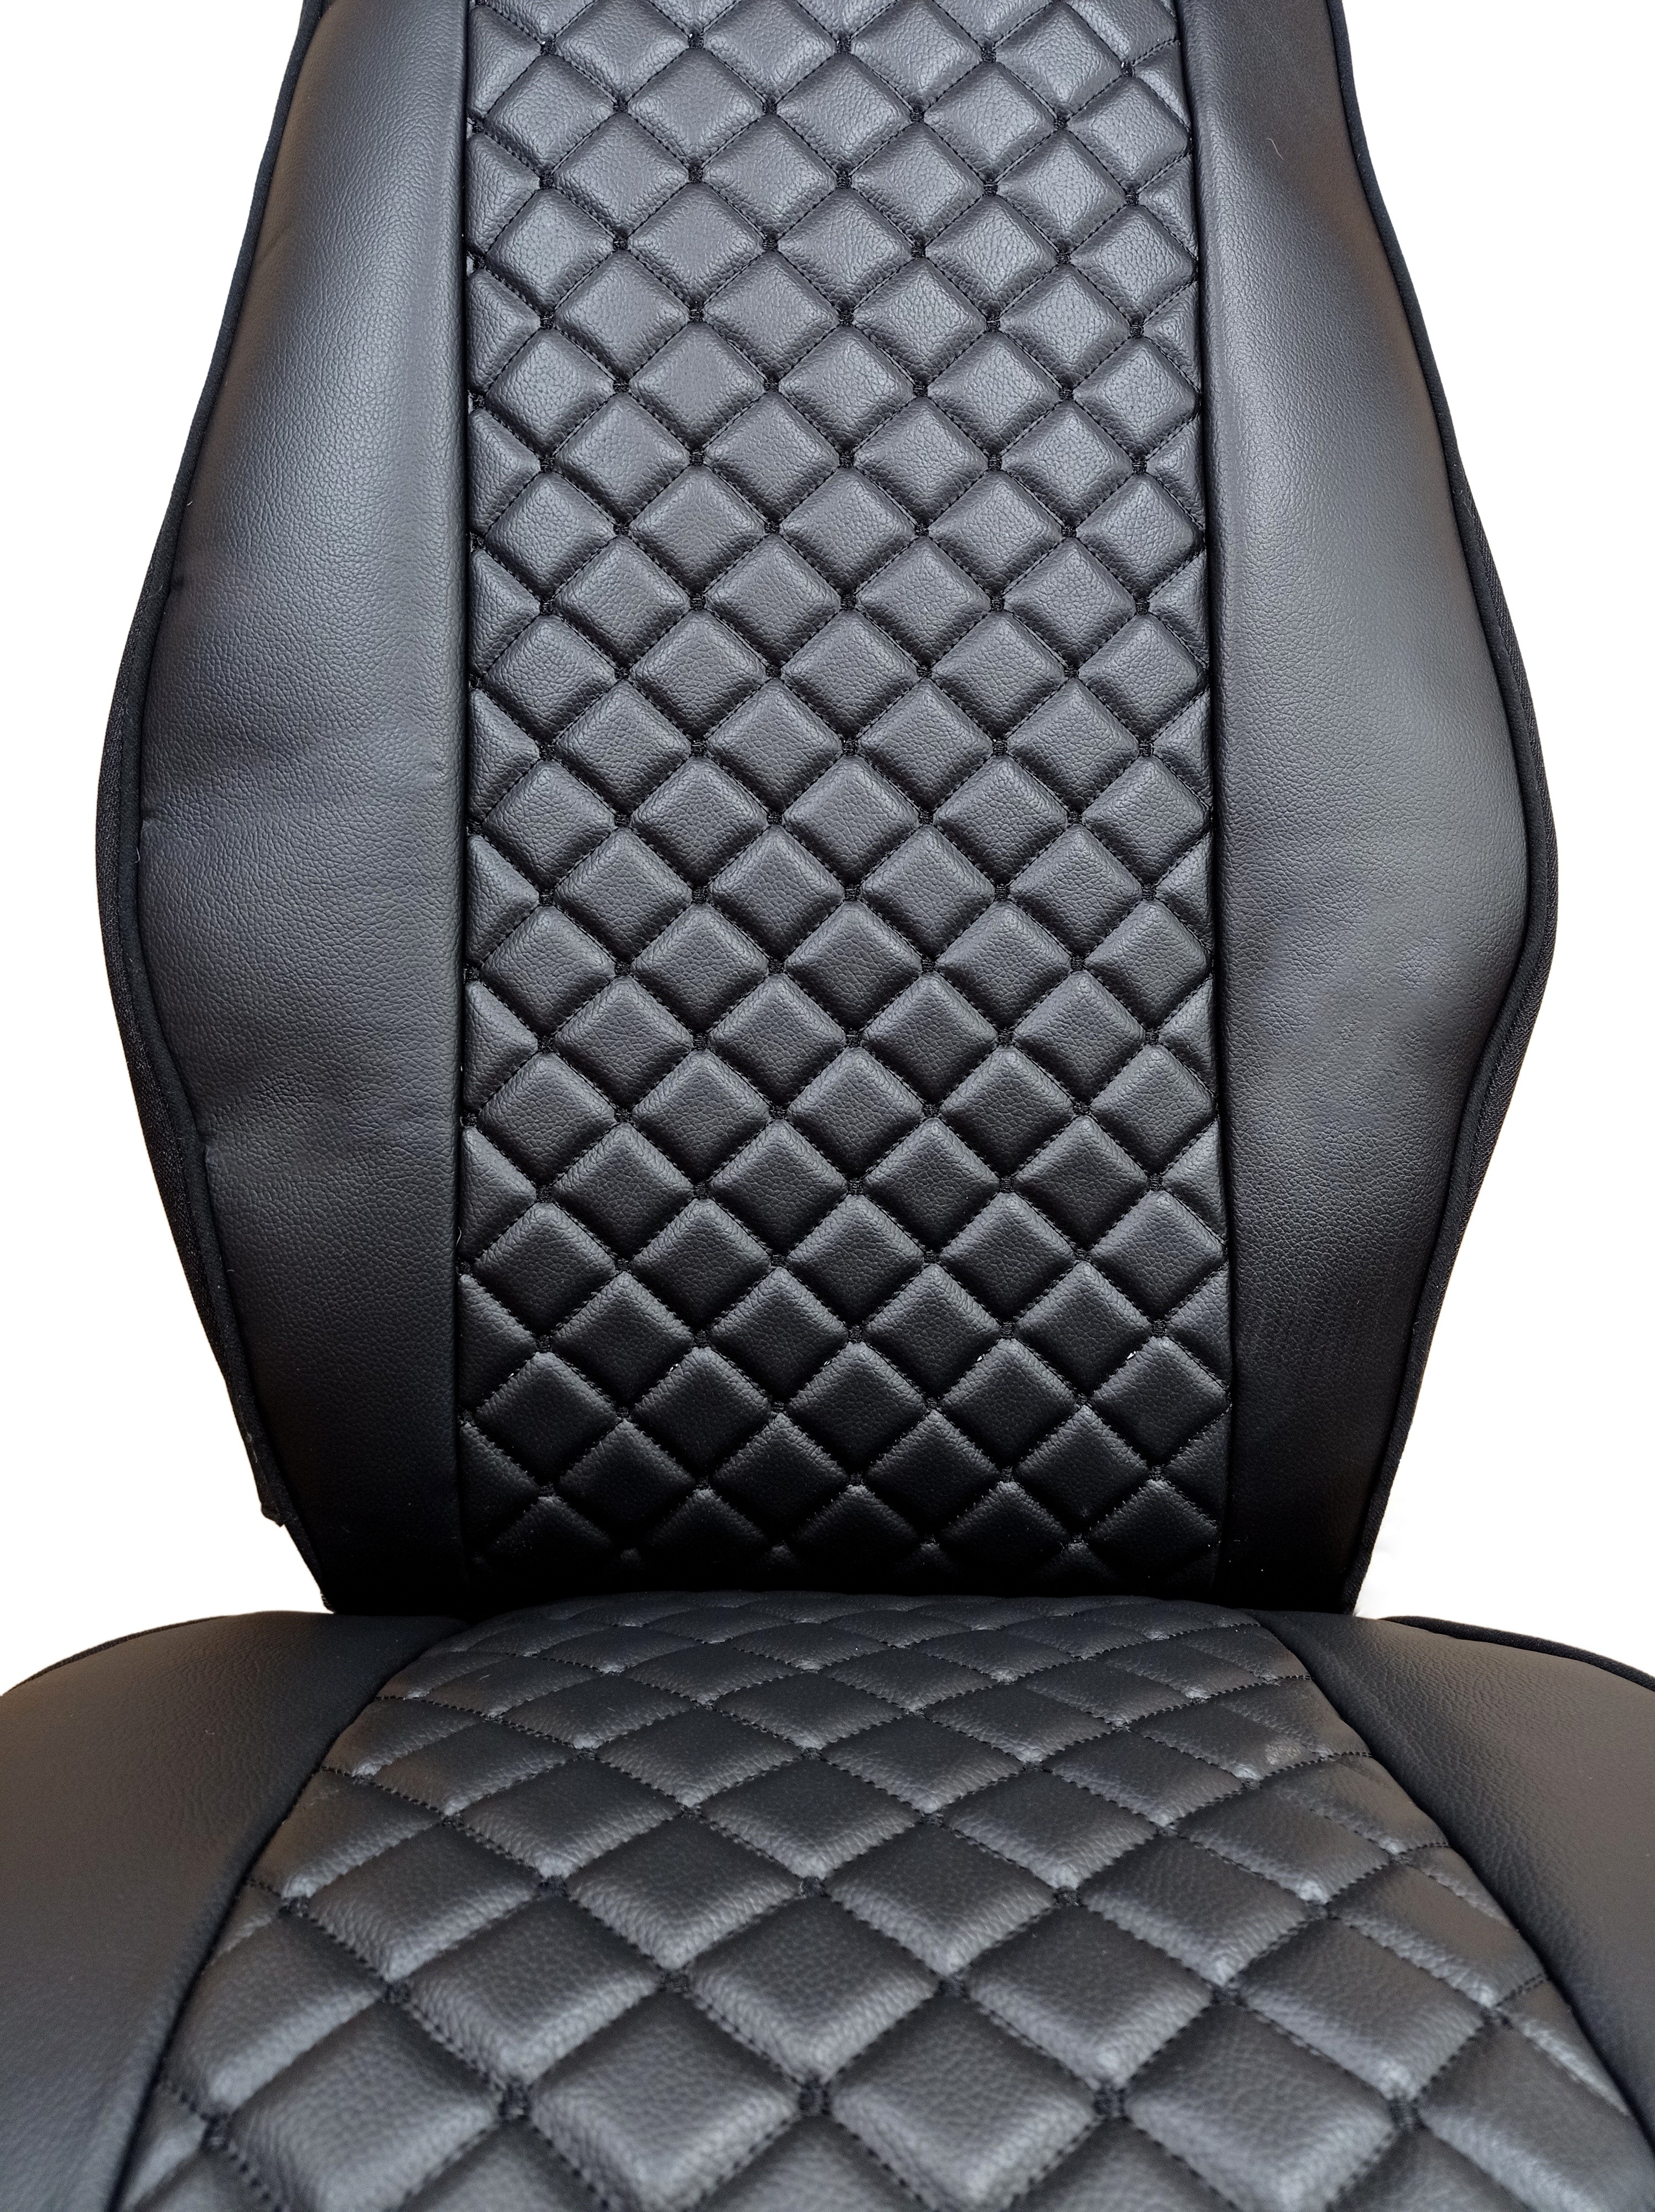 Seat covers for Volvo FH EURO 5 2006-2015 Truck Black Leather LHD RHD